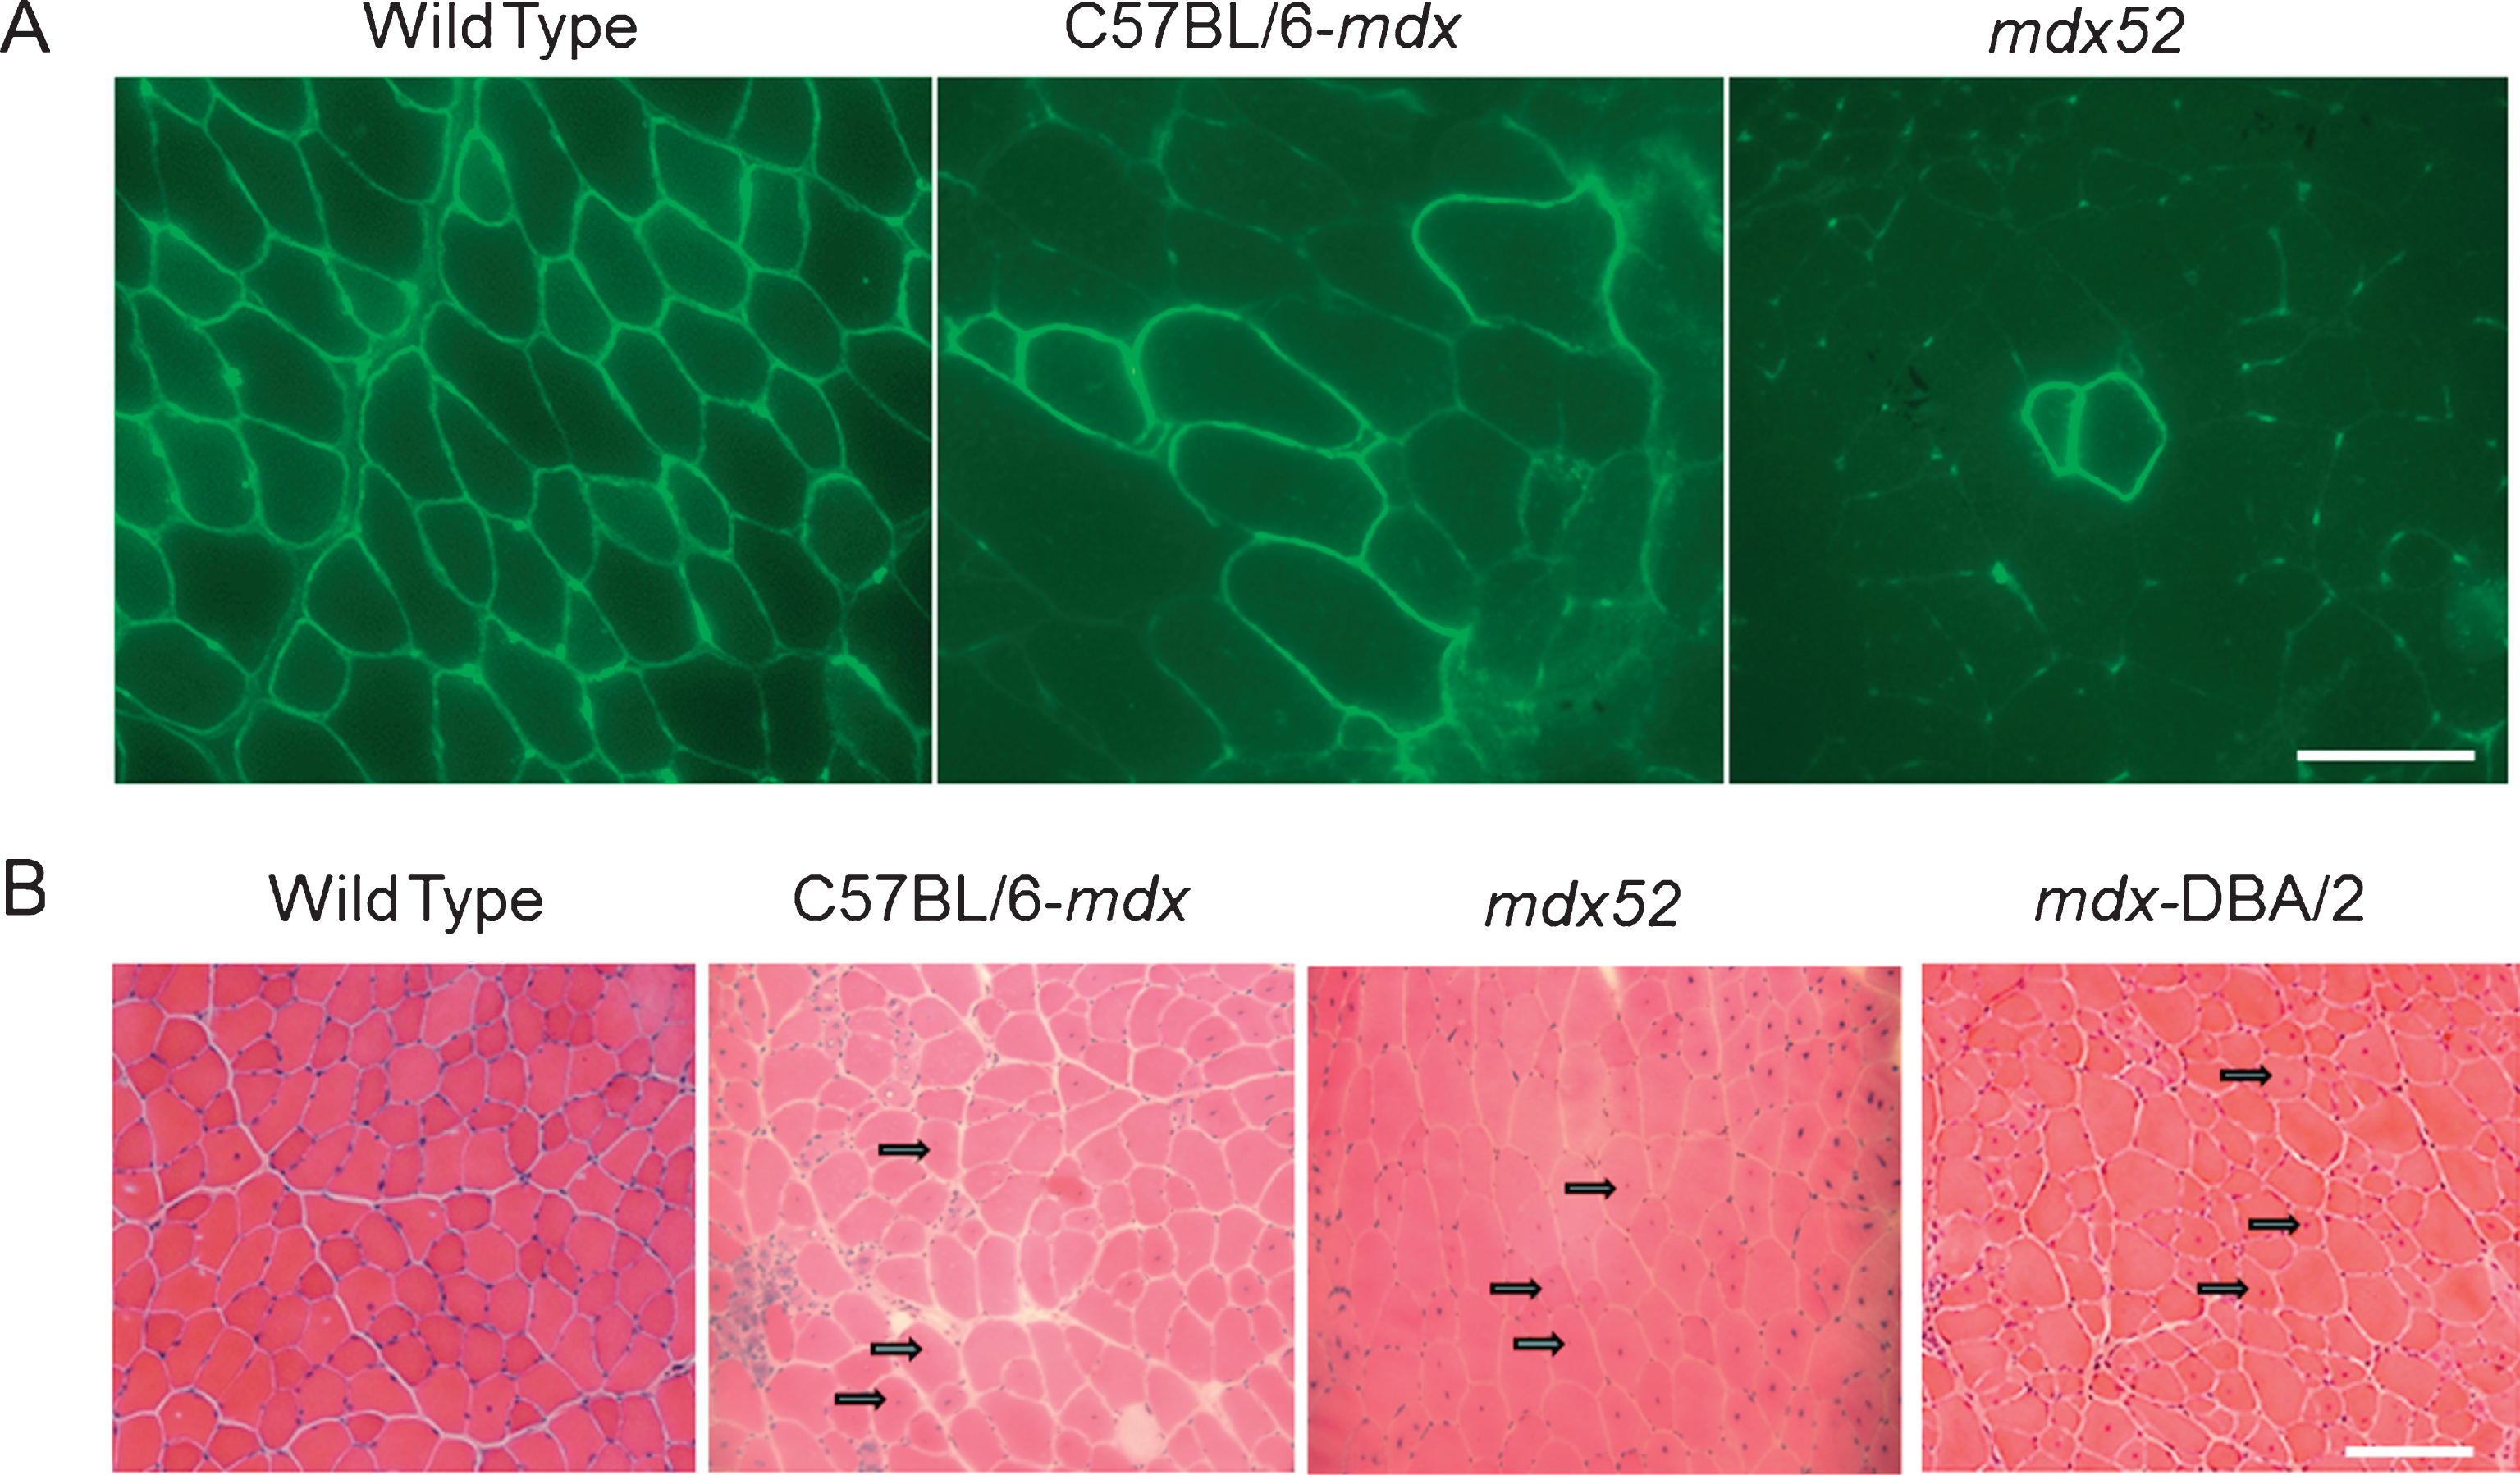 Histology concerning RF expression and CNFs observed in dystrophic mice models of mdx, mdx52 and/or mdx-DBA/2) (A) Mdx52 mice show lower number of RFs in a single cluster than mdx52 mice at 12 months of age. Echigoya et al., 2013 showed that mdx52 has a 58% lower RF expansion than age-matched mdx mice of 12 months. The tibialis anterior (TA) muscles of mdx and mdx52 were immunostained with a rabbit polyclonal antibody against C-terminal domain (position at 3,661– 3,677 amino acids; Abcam, Bristol, UK). Bars = 50μm. (B) Hematoxylin and eosin stained images for TA muscles of mdx, mdx52 and mdx-DBA/2 mice at 2 months of age. Arrows indicate centrally nucleated fibers. Bars = 100μm.